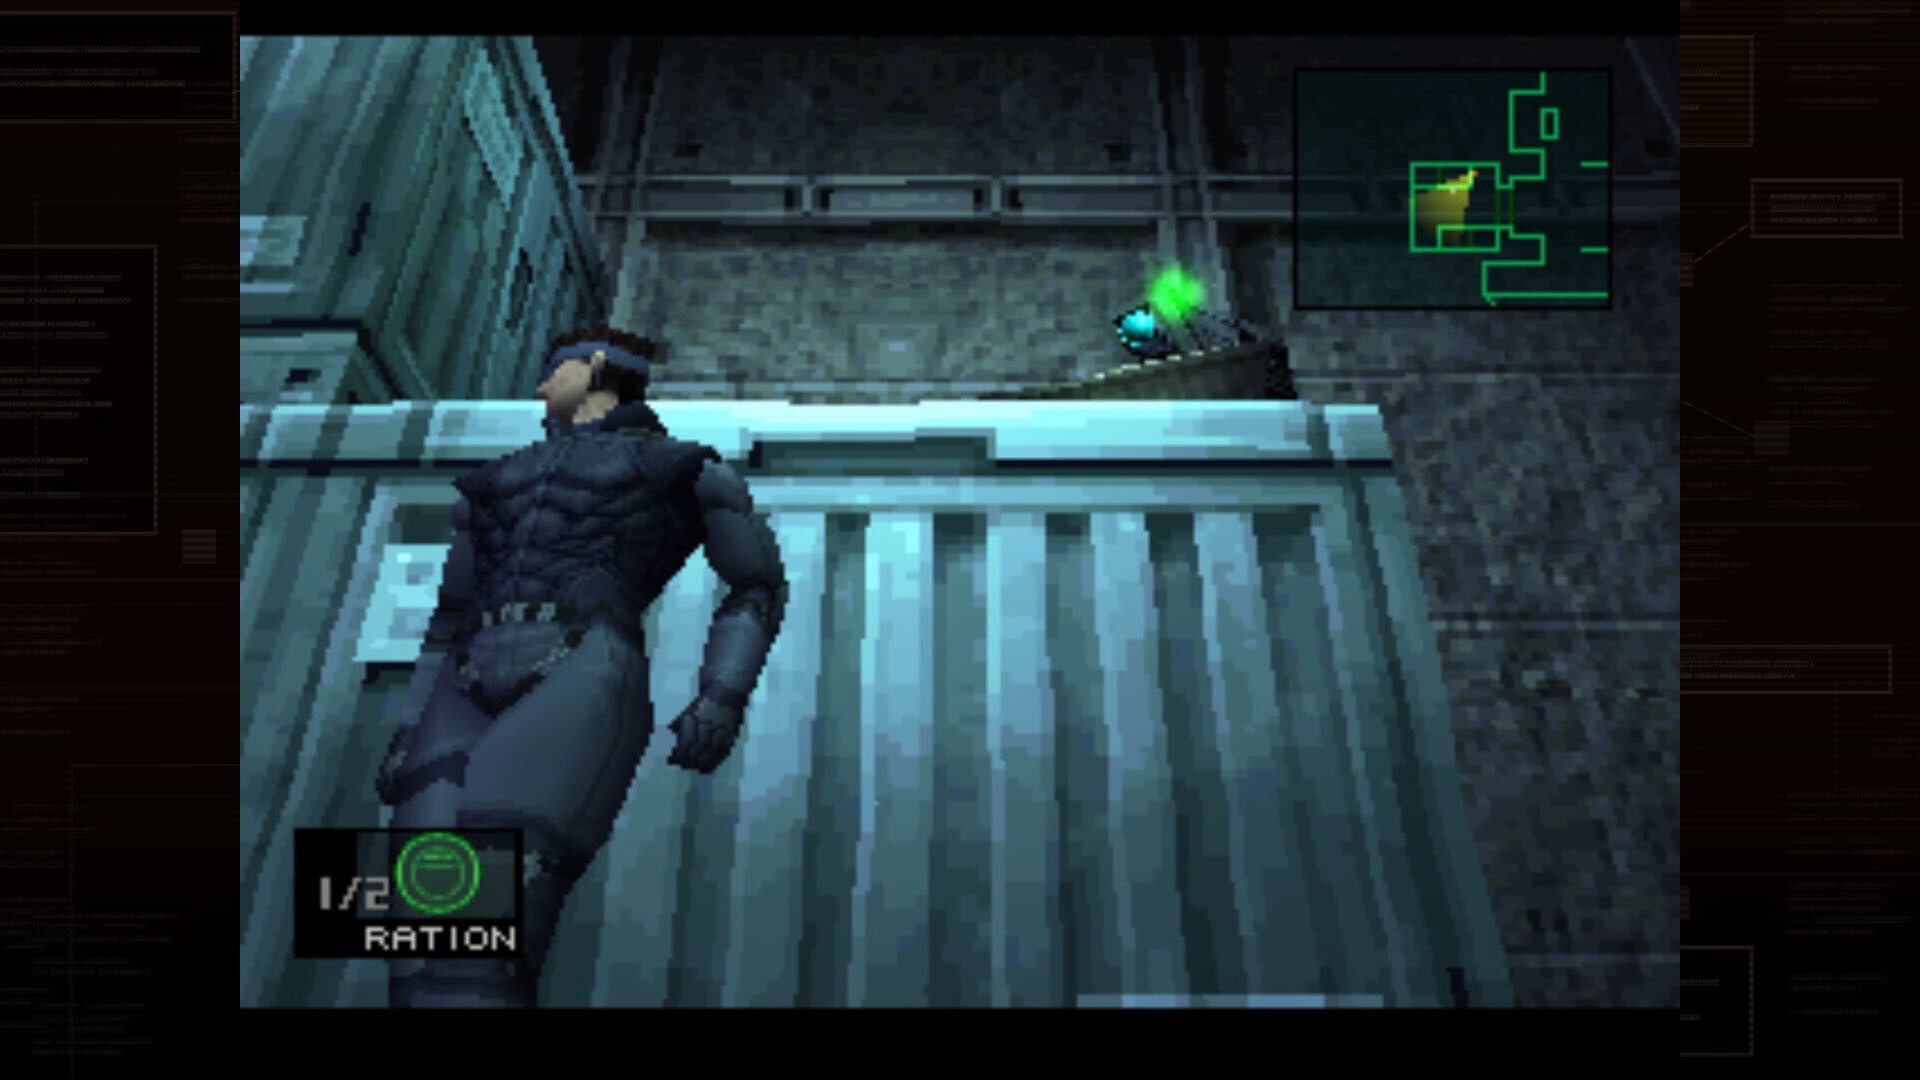 METAL GEAR SOLID Δ: SNAKE EATER on Steam